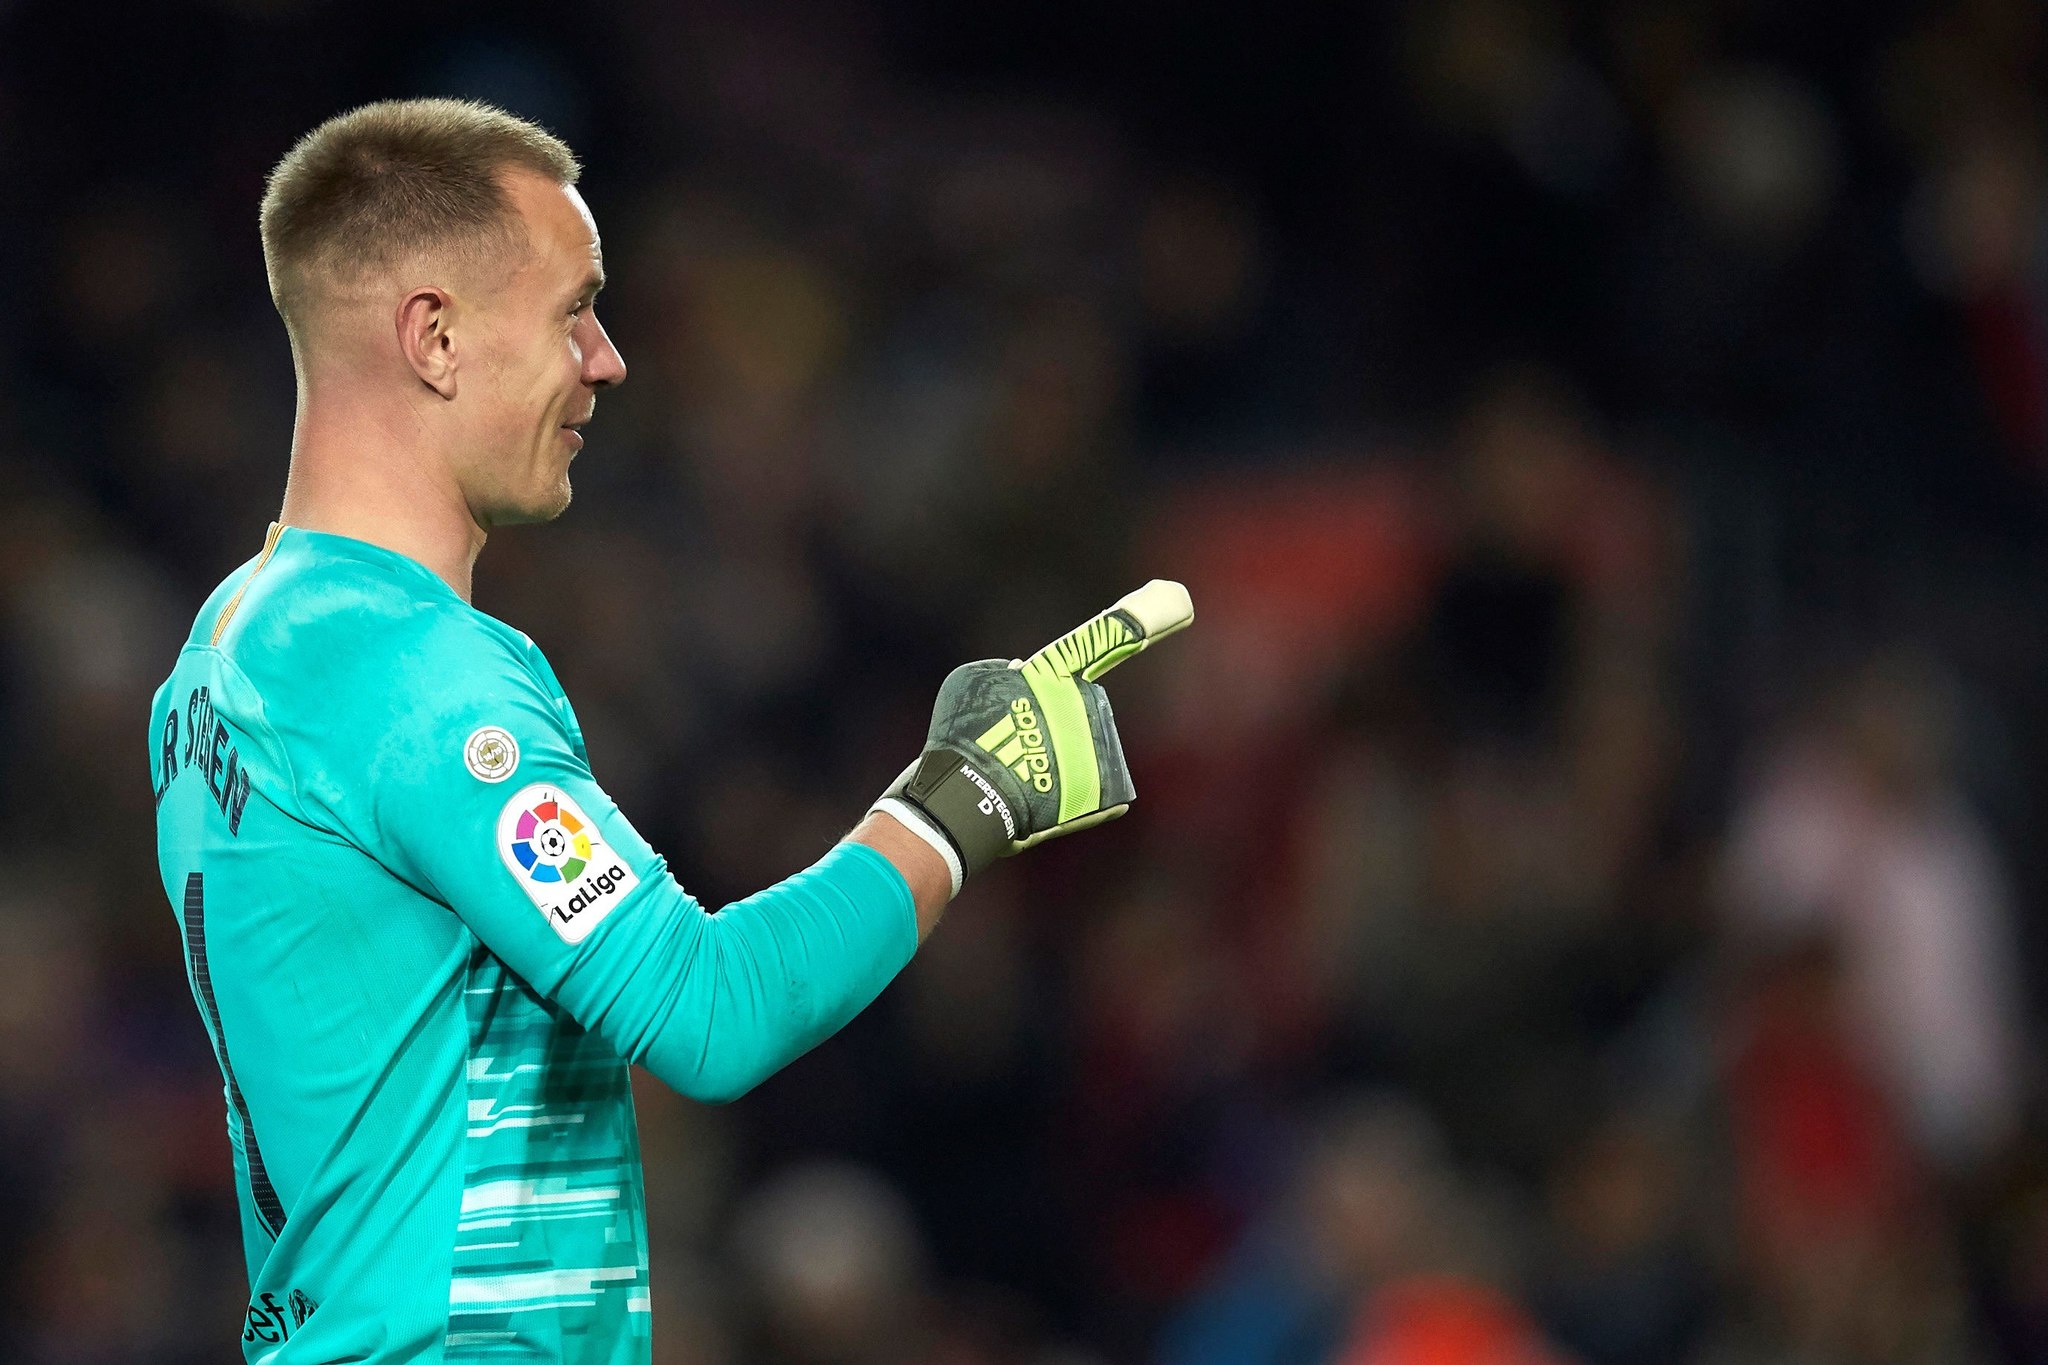 Ter Stegen has made two assists this season